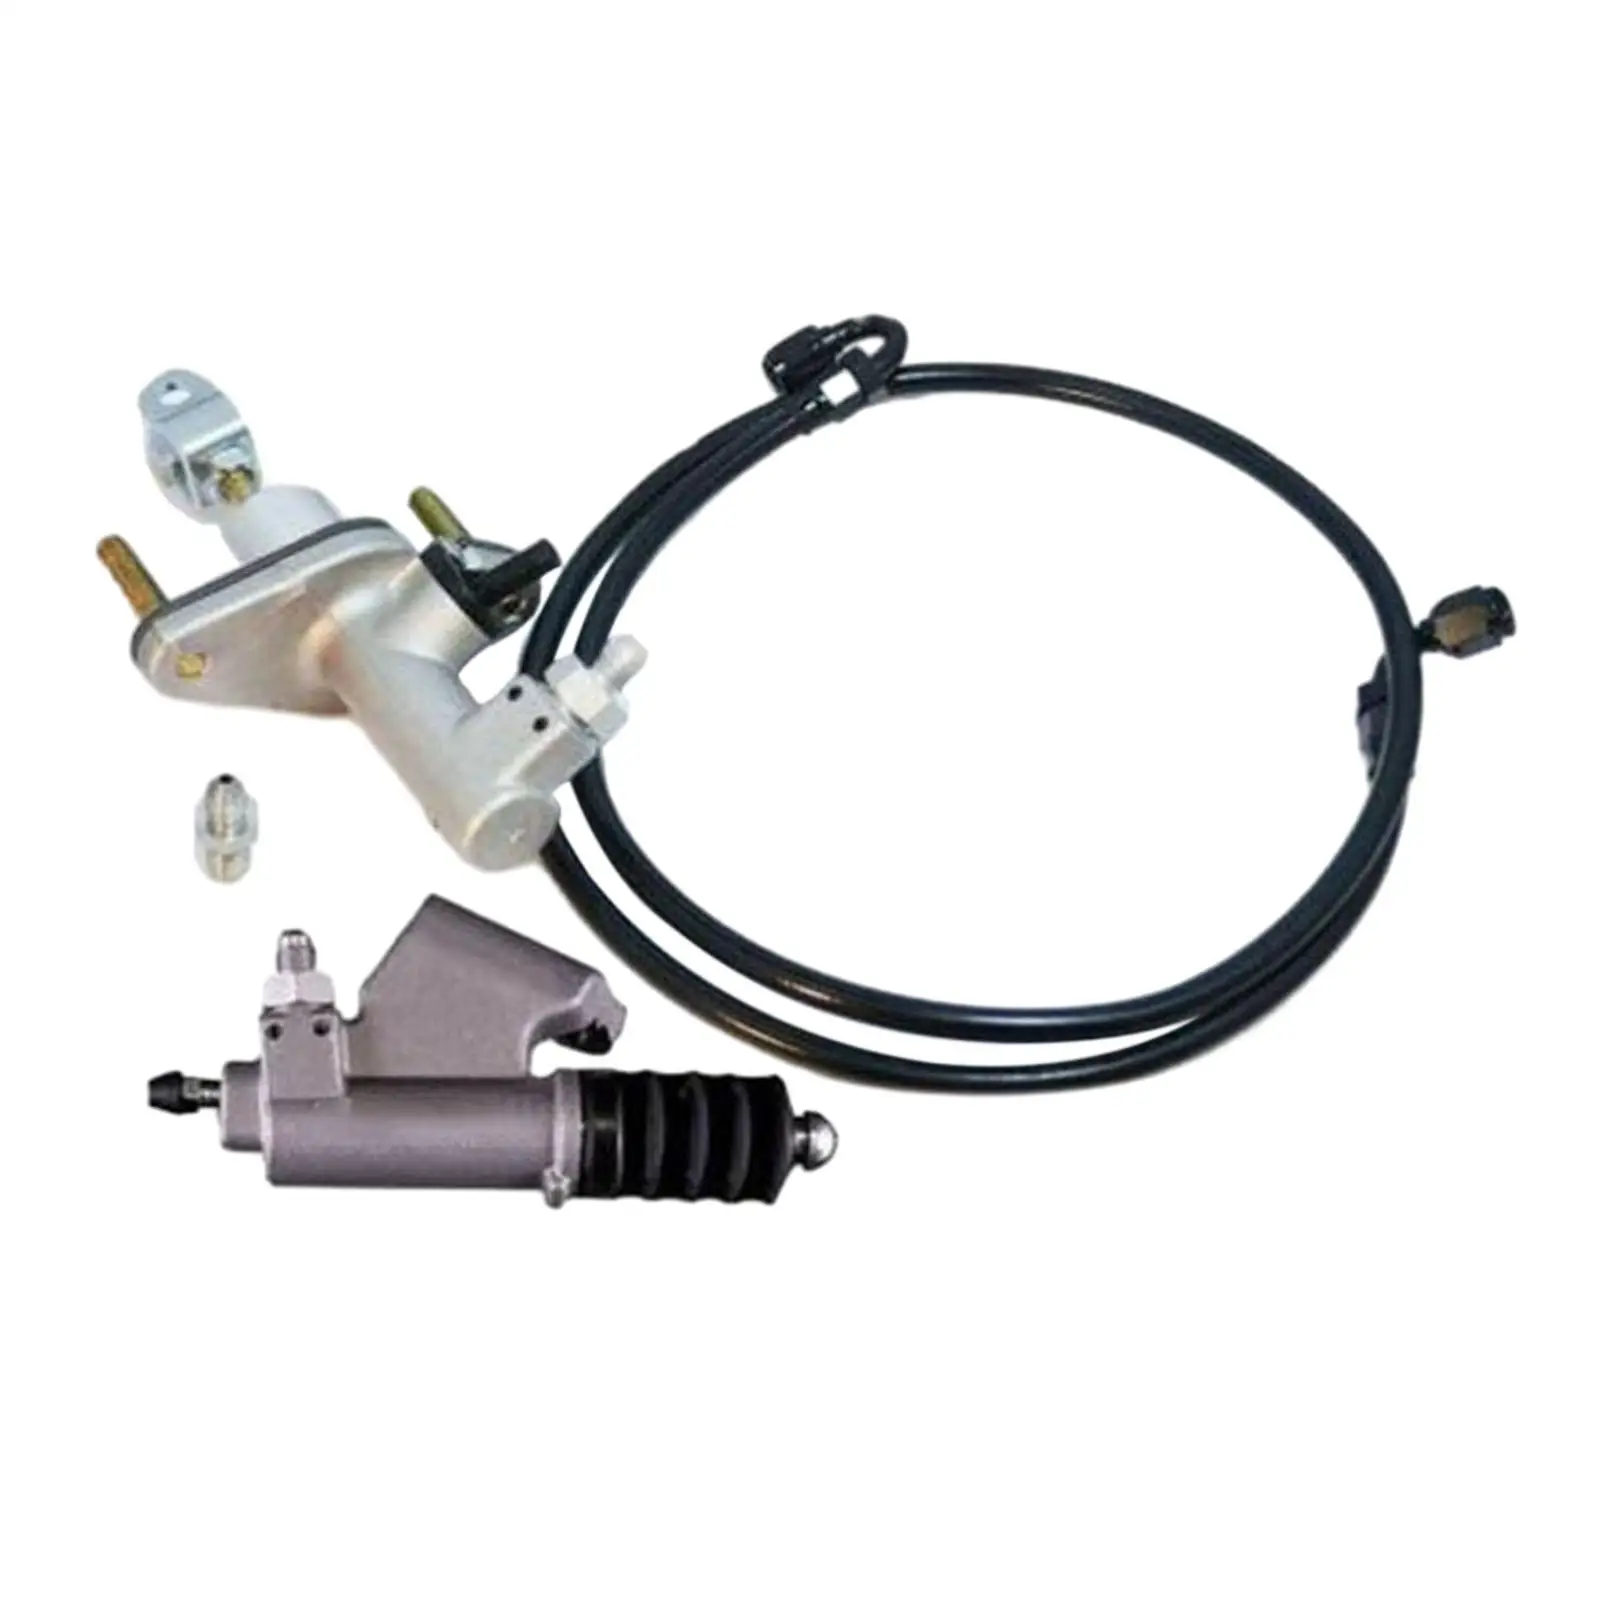 Ktd-clk-kms Clutch Master Cylinder Kit for Acura Easily Install Durable